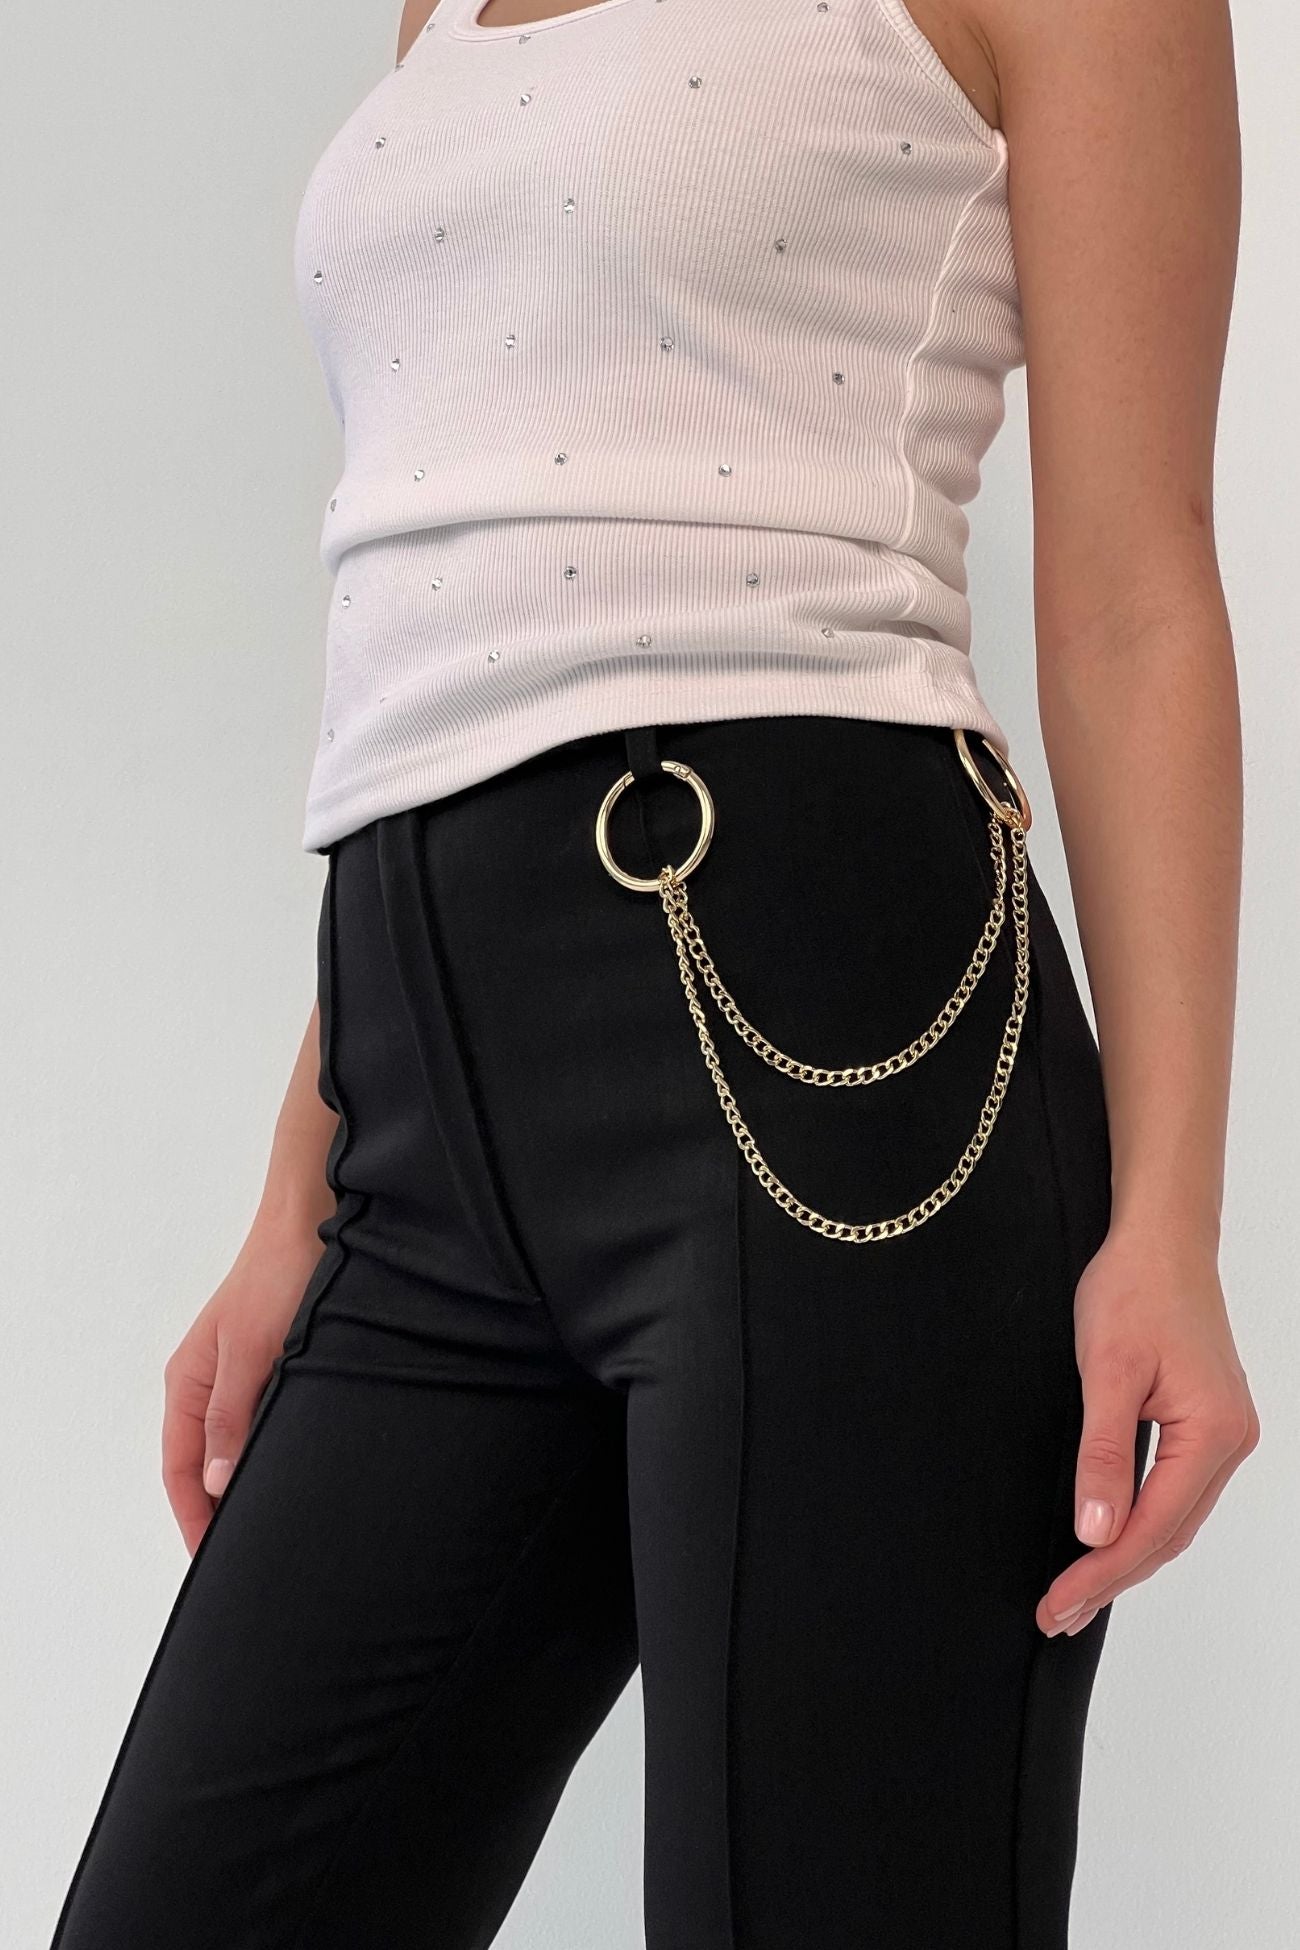 Original Black High-Waisted Business Pants with Decorative Chain